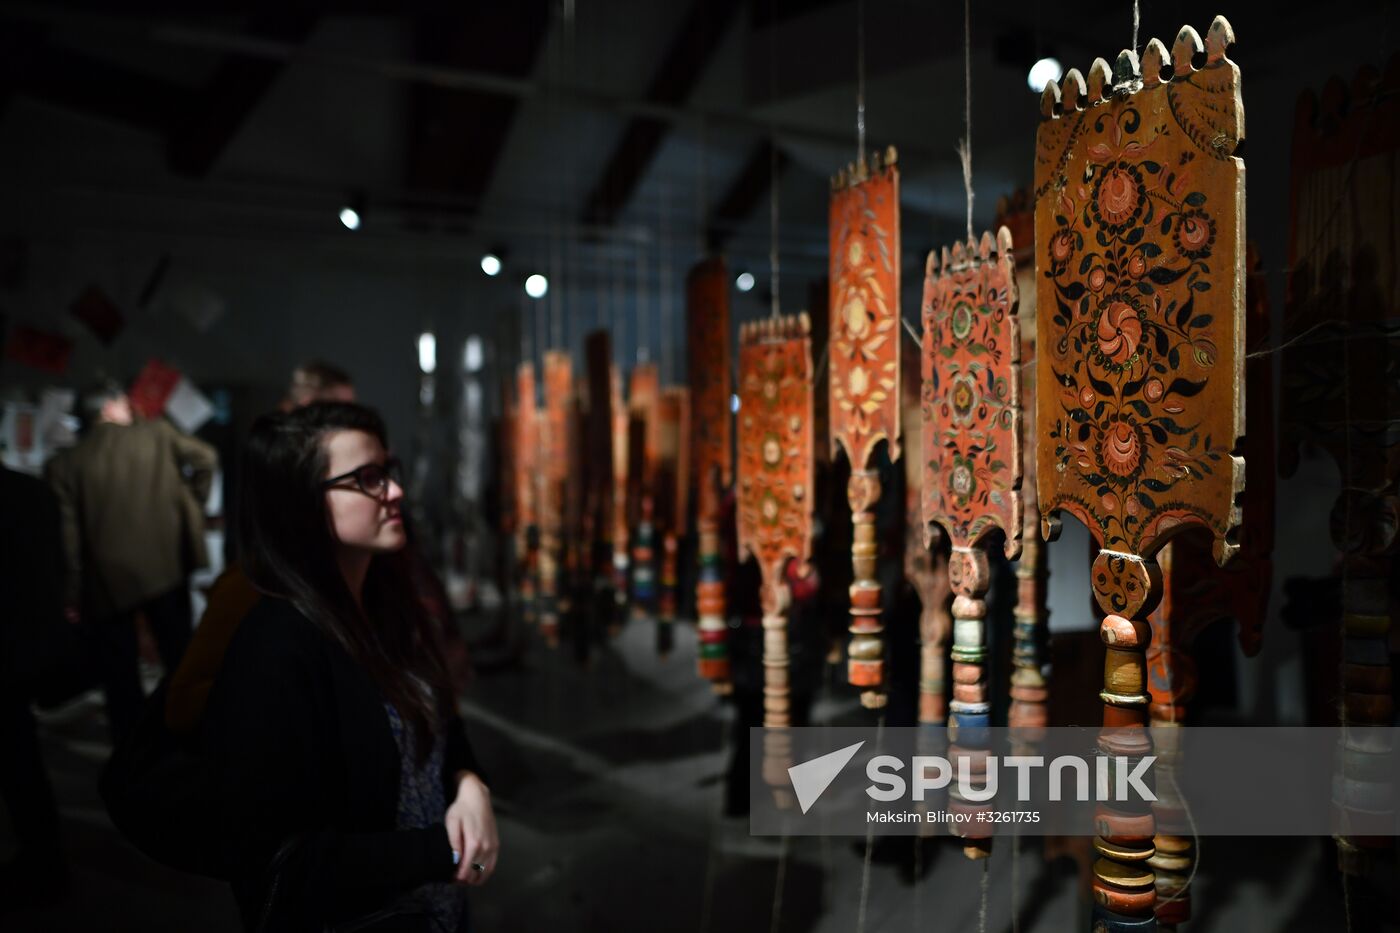 Agitation Spinning Wheel: Revolution's 100th Anniversary exhibition opens in Moscow